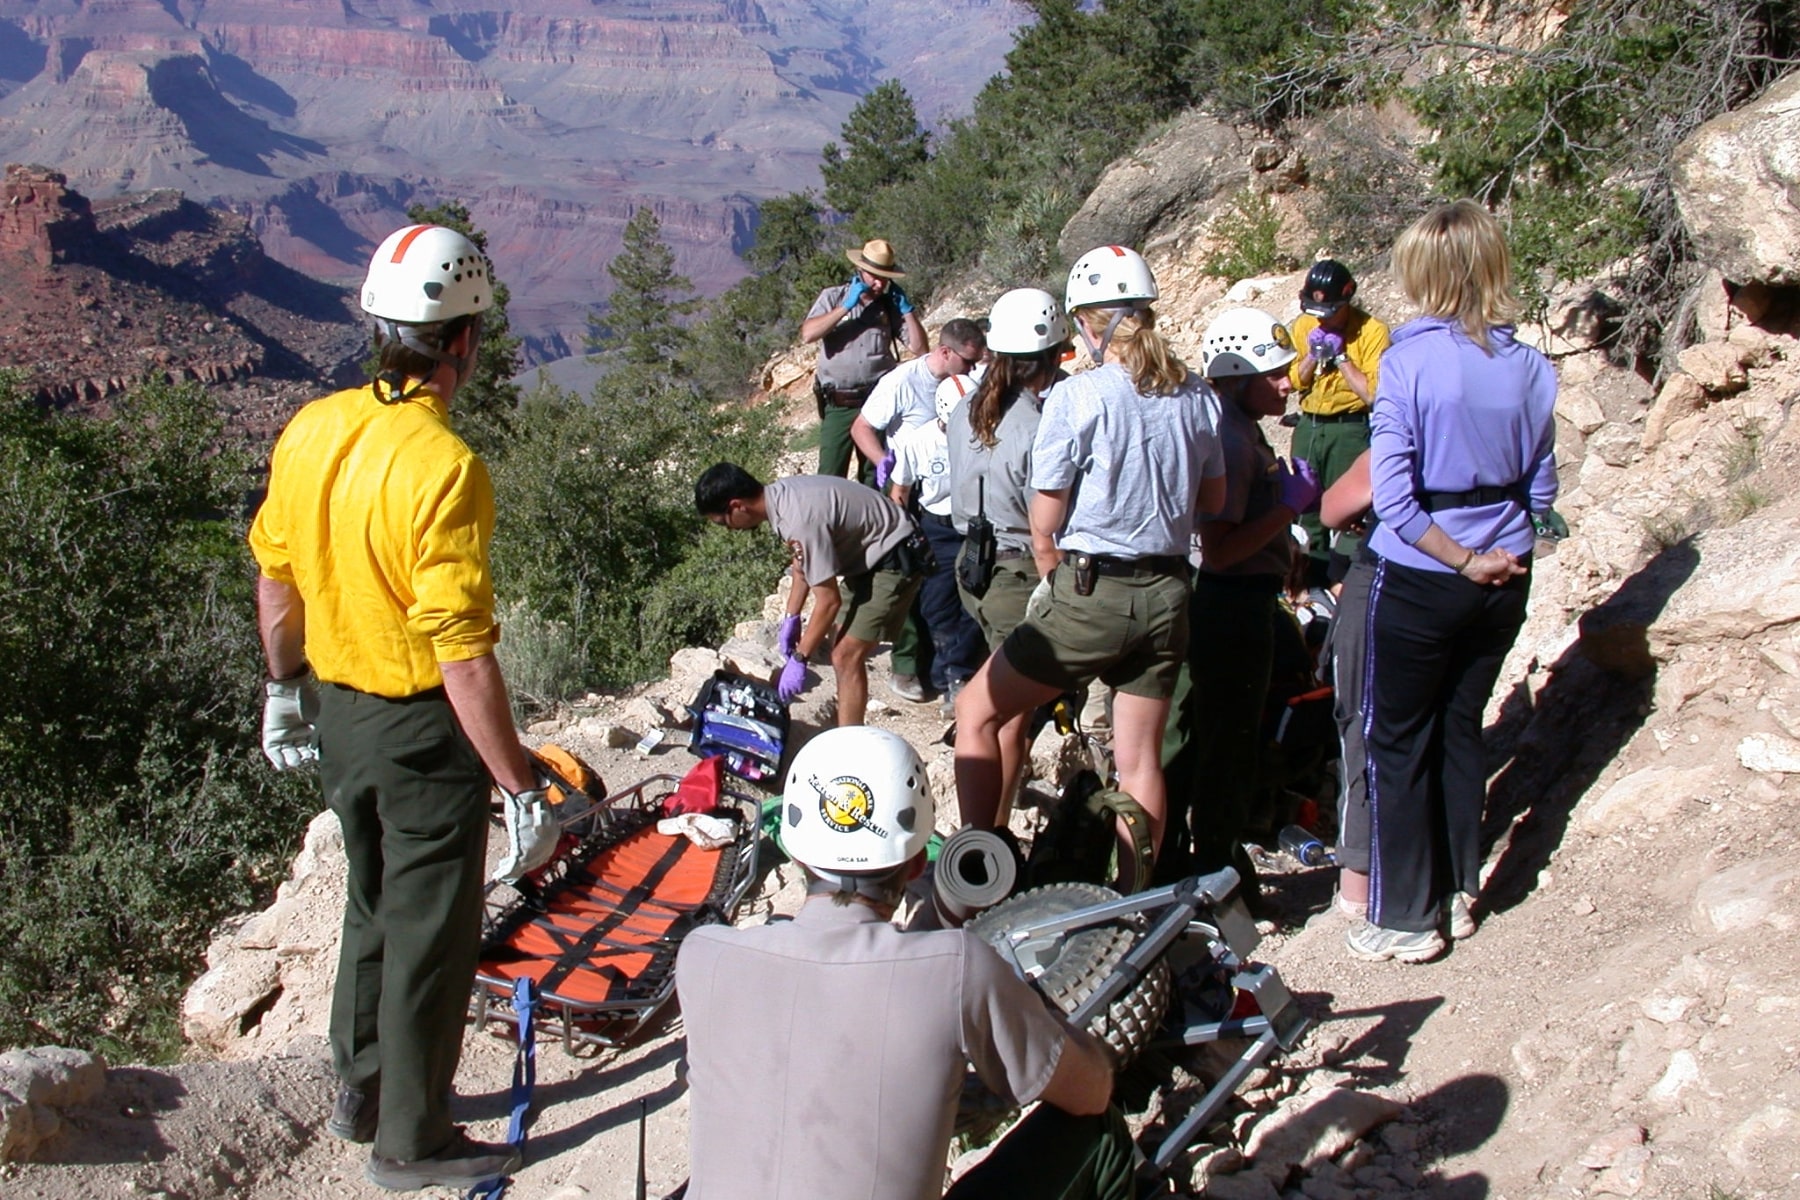 Grand Canyon Search and Rescue team on the side of steep canyon trail.